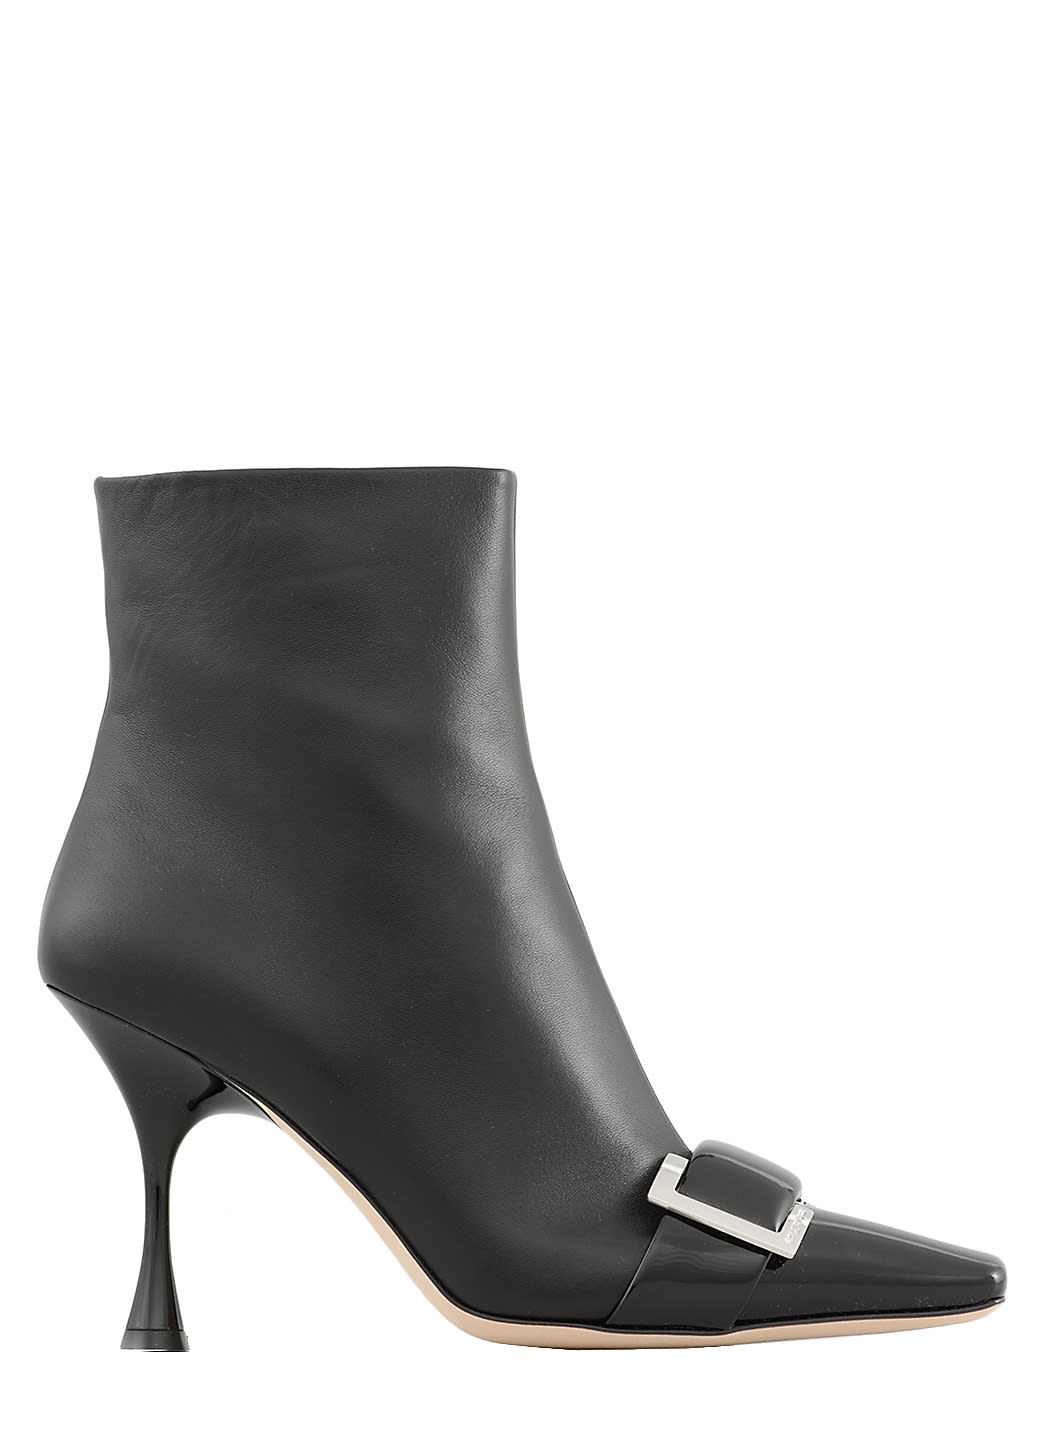 Buy Sergio Rossi 090 Twenty Boot online, shop Sergio Rossi shoes with free shipping